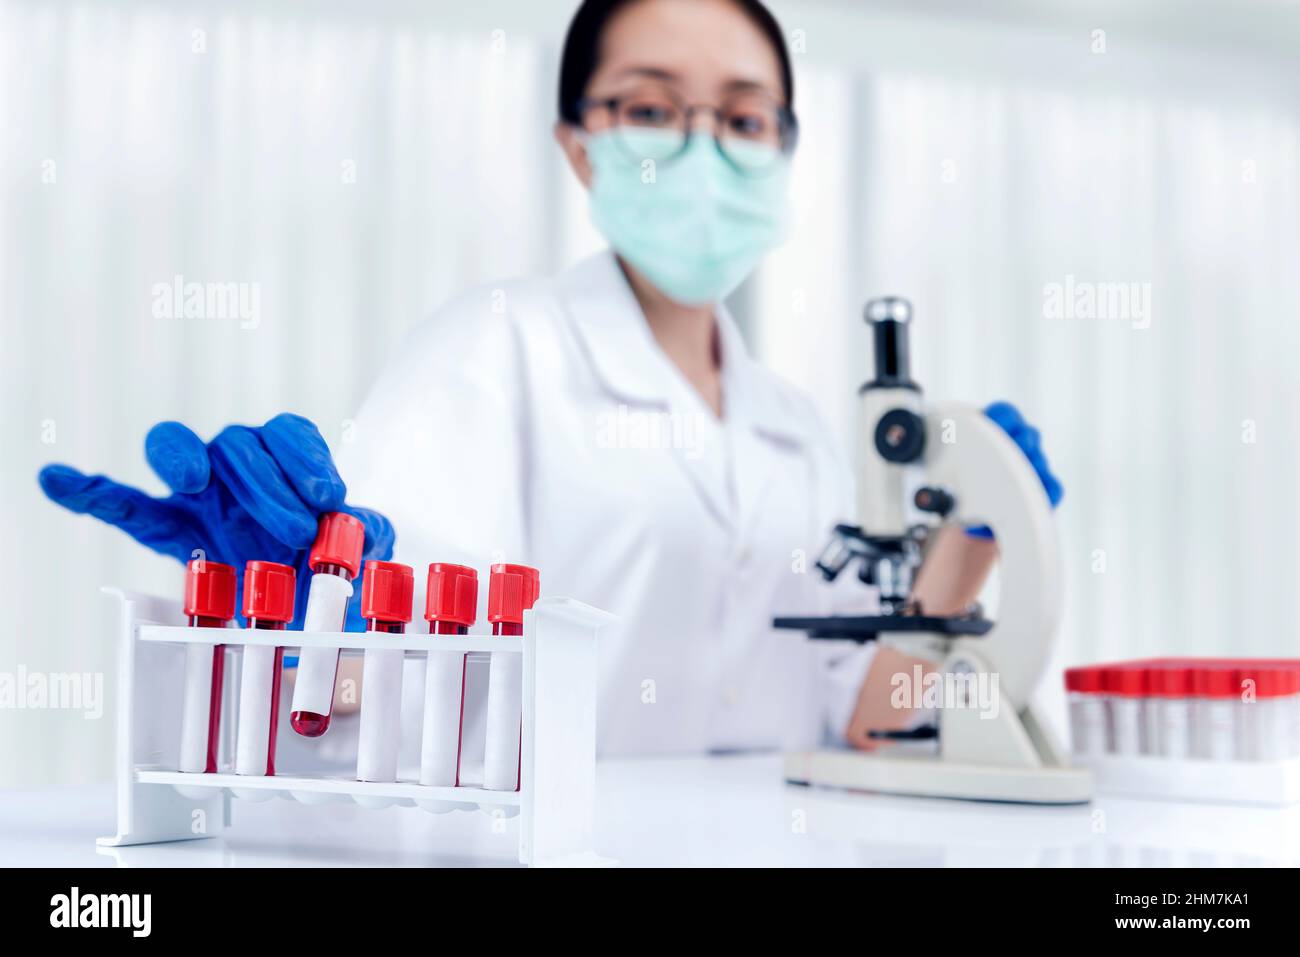 Asian researcher woman with face mask and glasses taking the medical tube from the rack on the lab Stock Photo